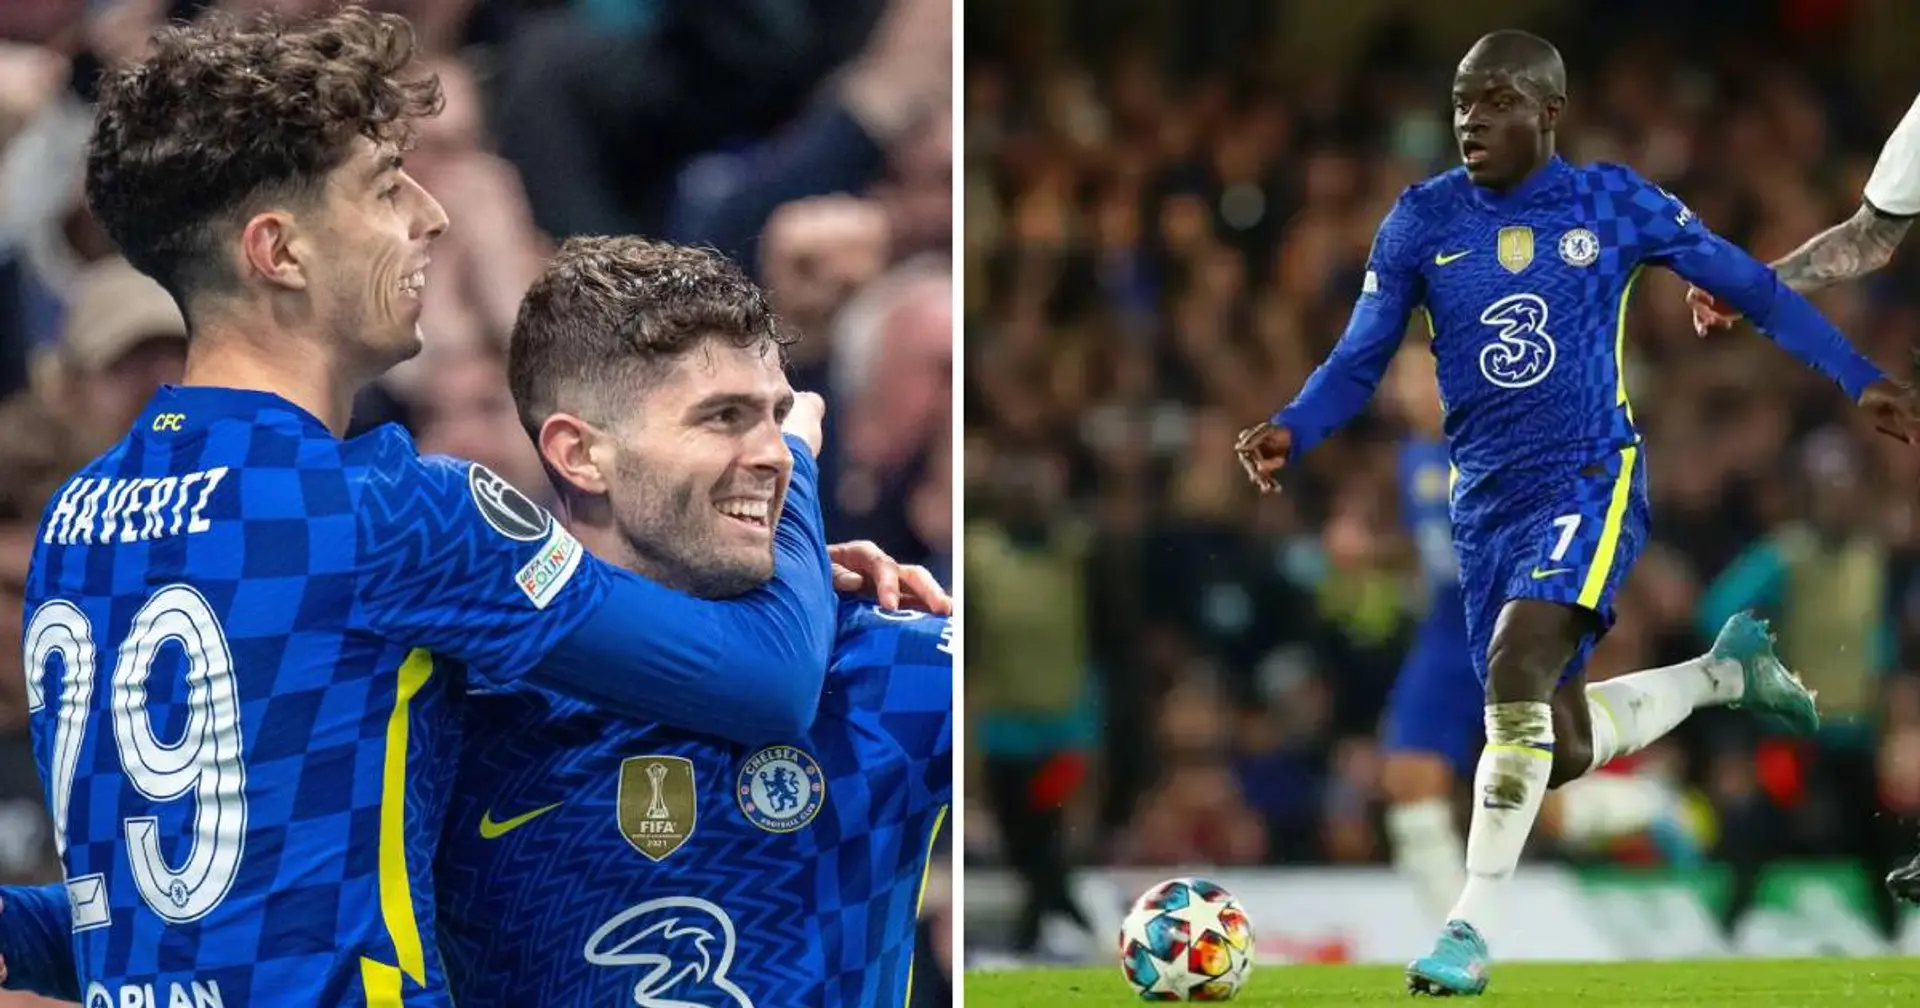 Chelsea set record for an English team with win against Lille